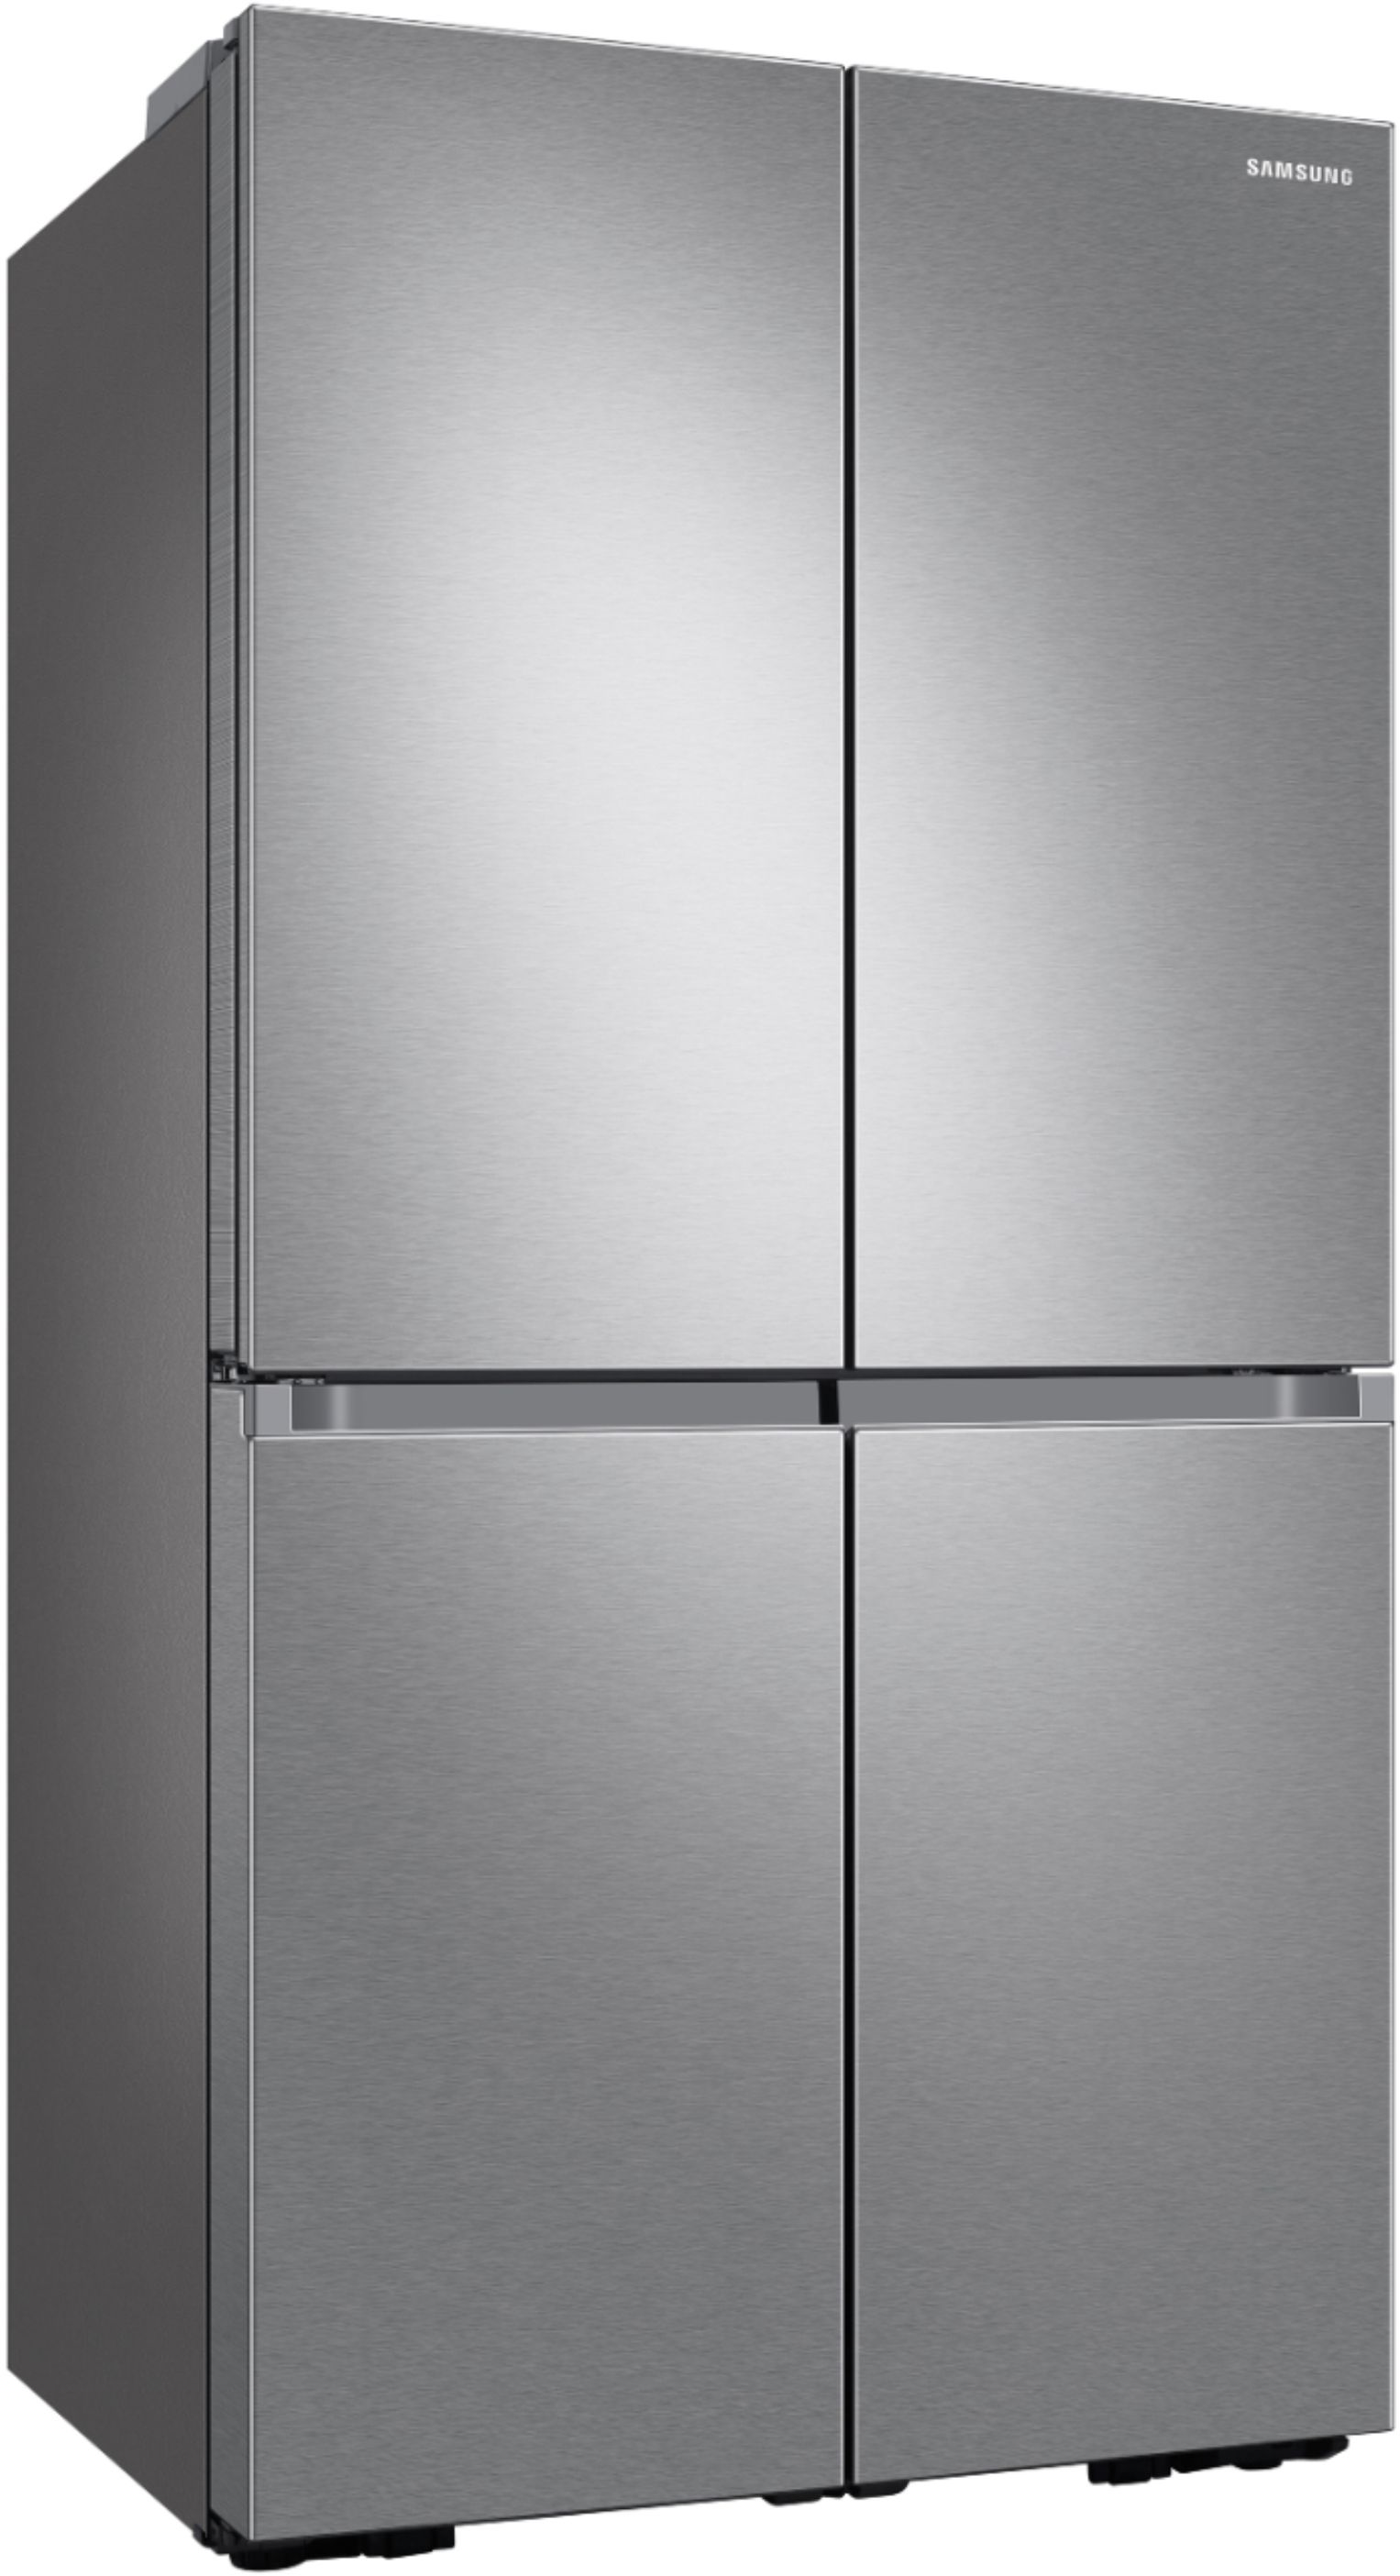 Simple Fix for Samsung Smart Fridge Making Crushed Ice All The Time 